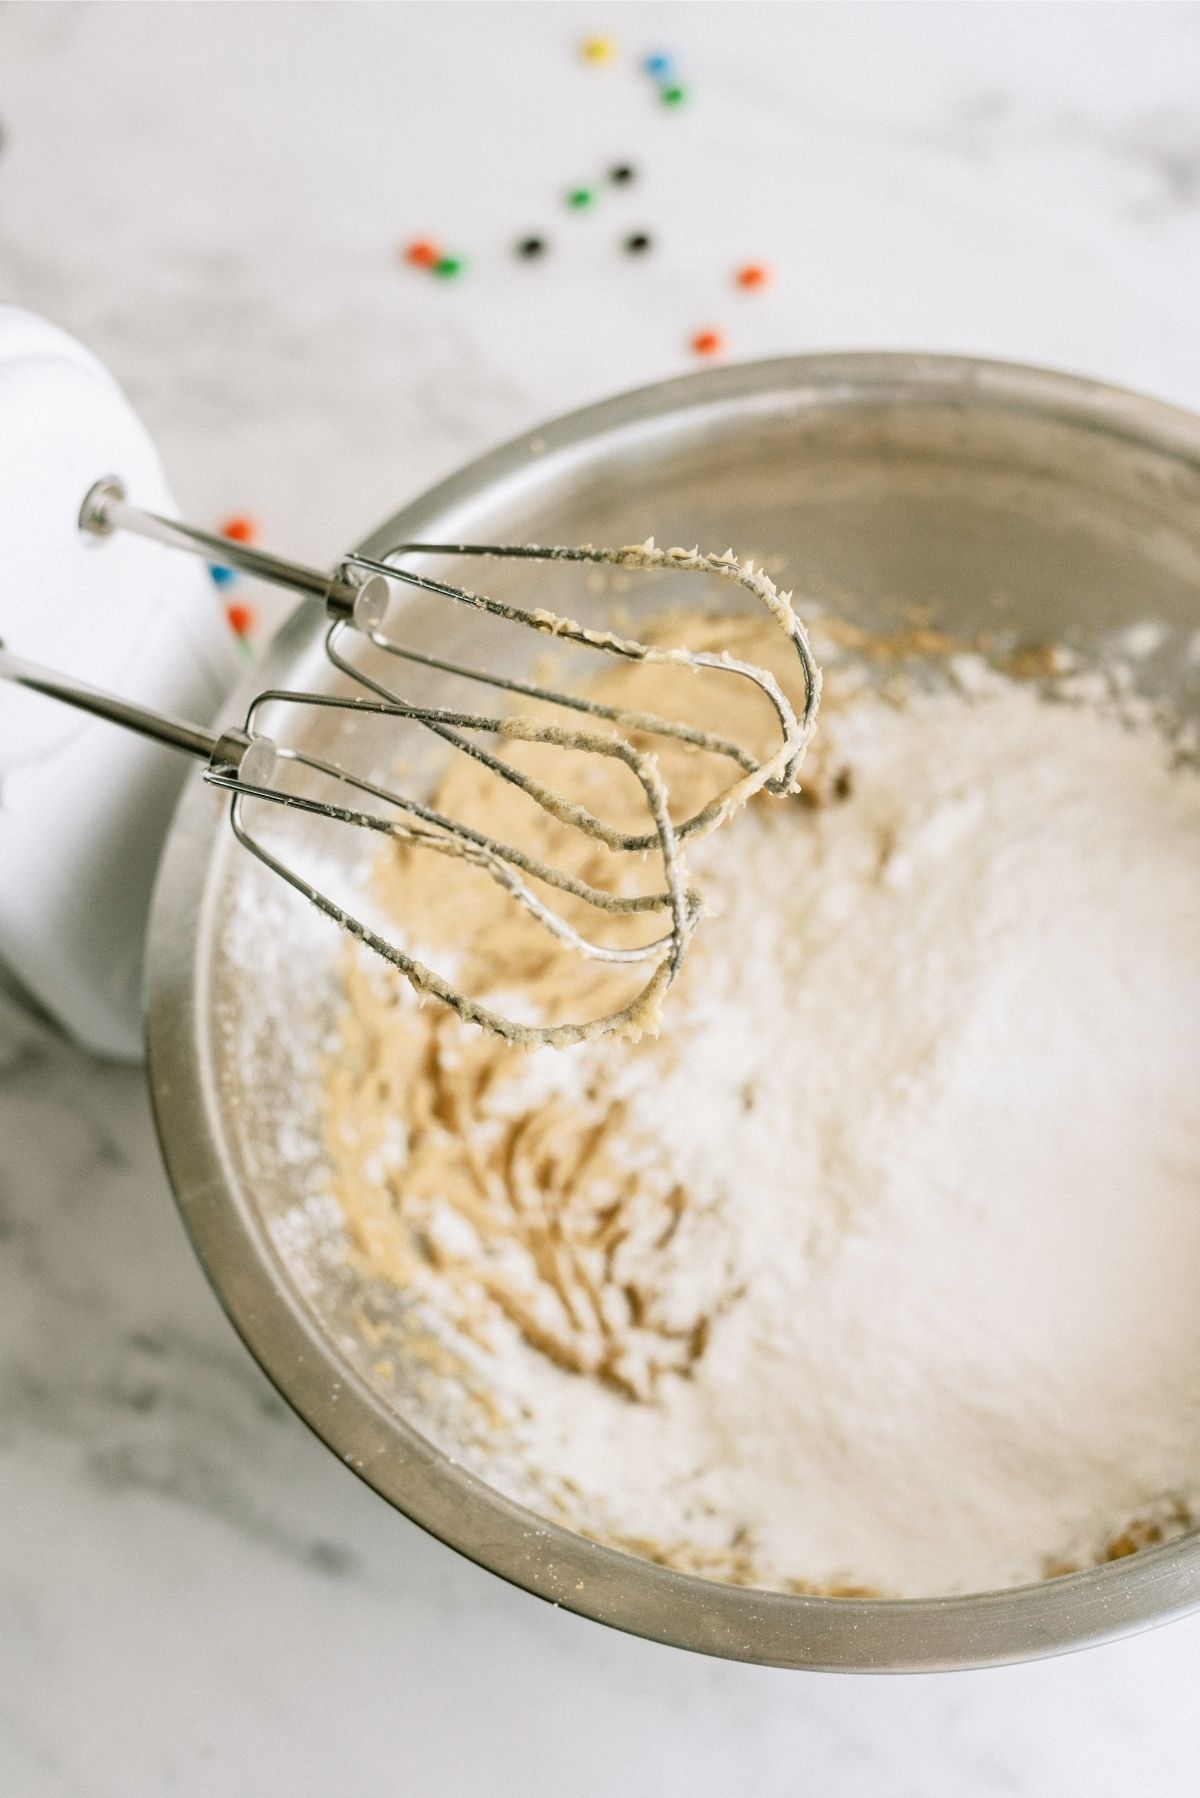 stand mixer mixing together the unsalted butter, granulated sugar, and brown sugar